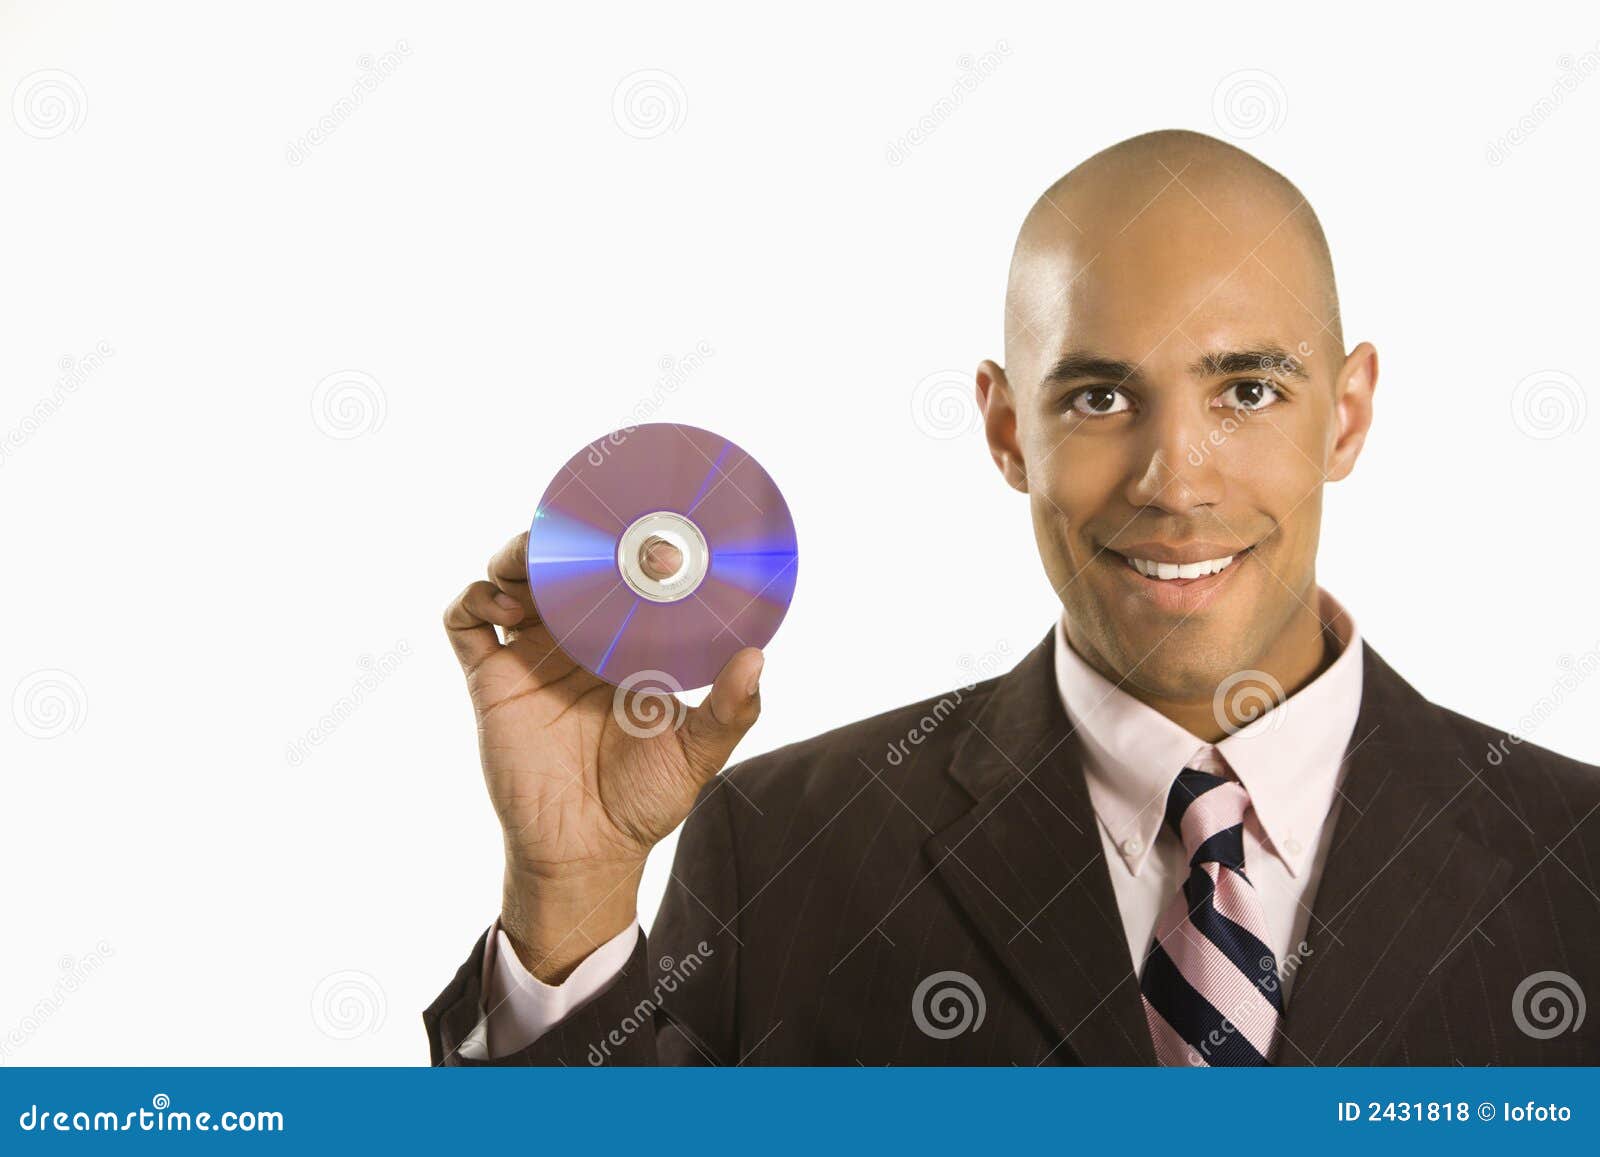 man holding compact disc.